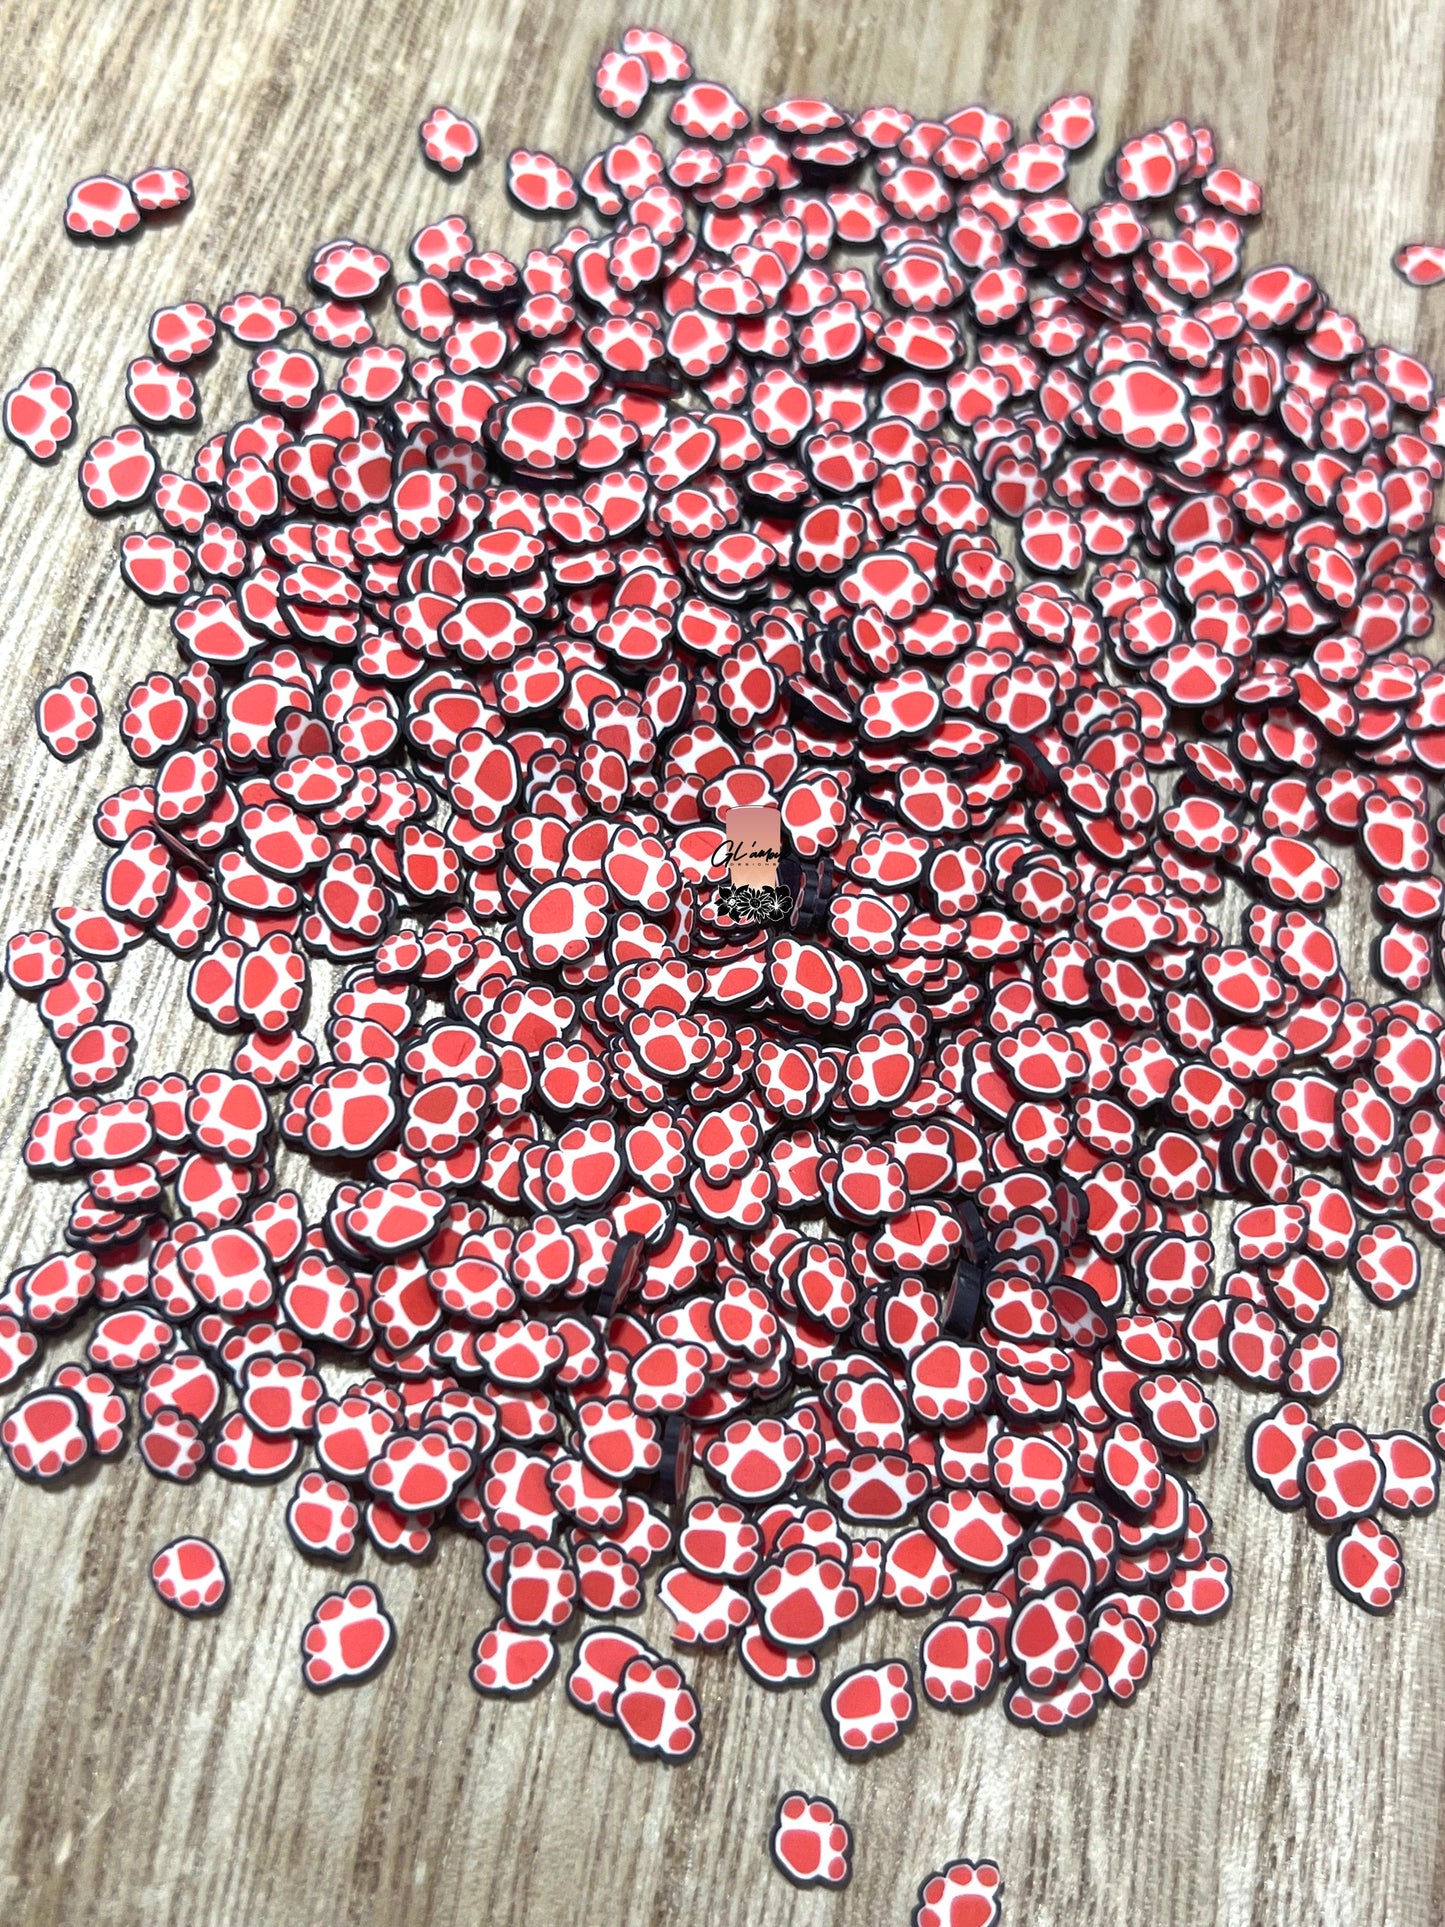 Dog Paw Red & Black Polymer Slices -small 5mm